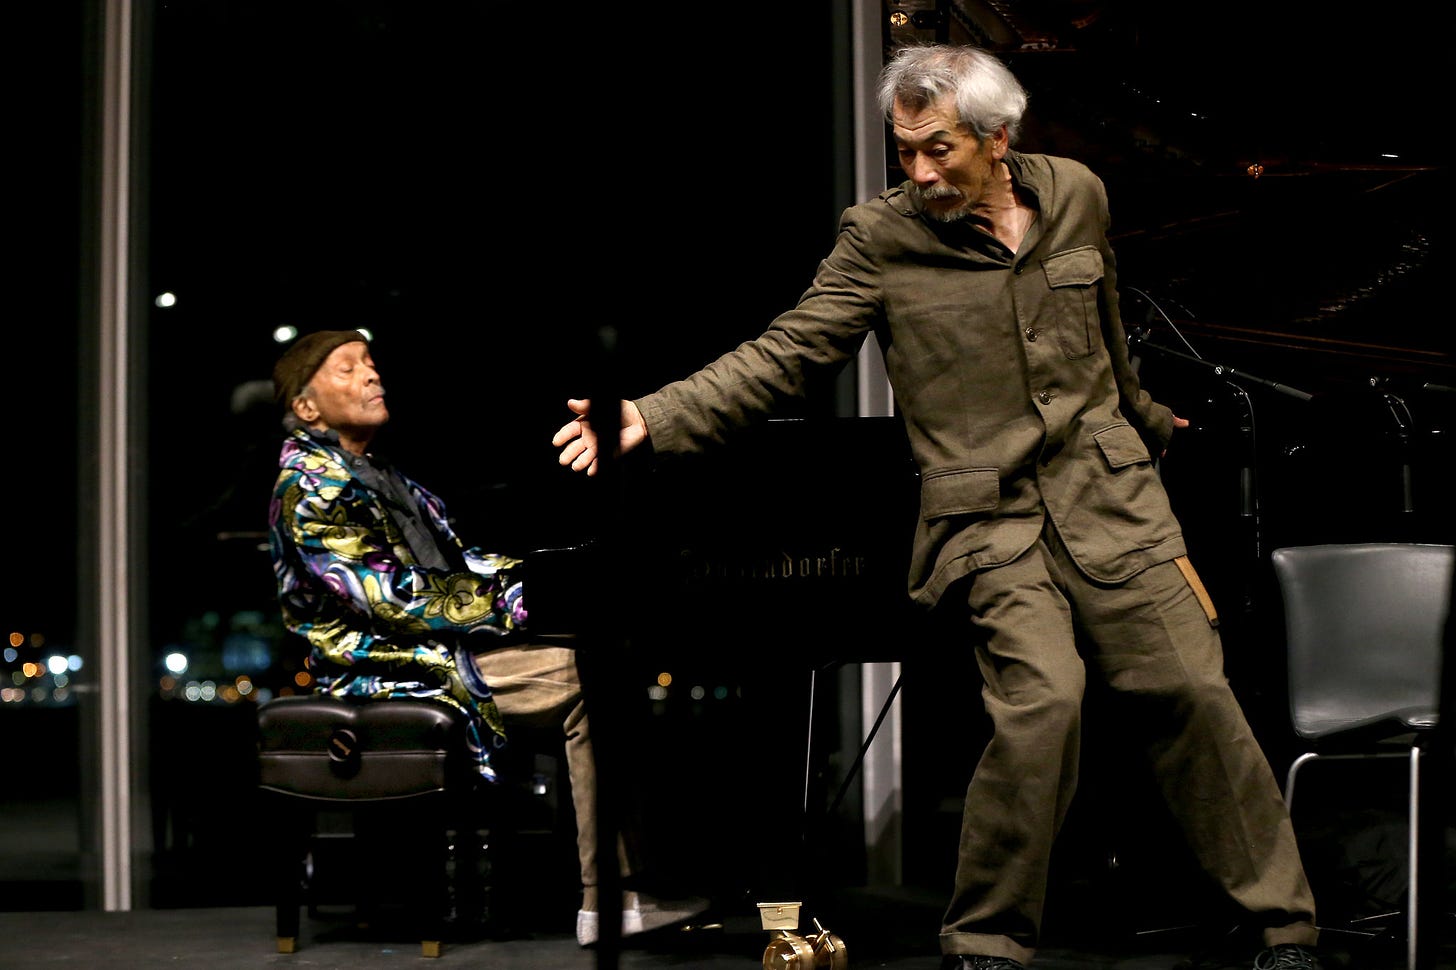 Cecil Taylor & Min Tanaka at the Whitney Museum, April 2016